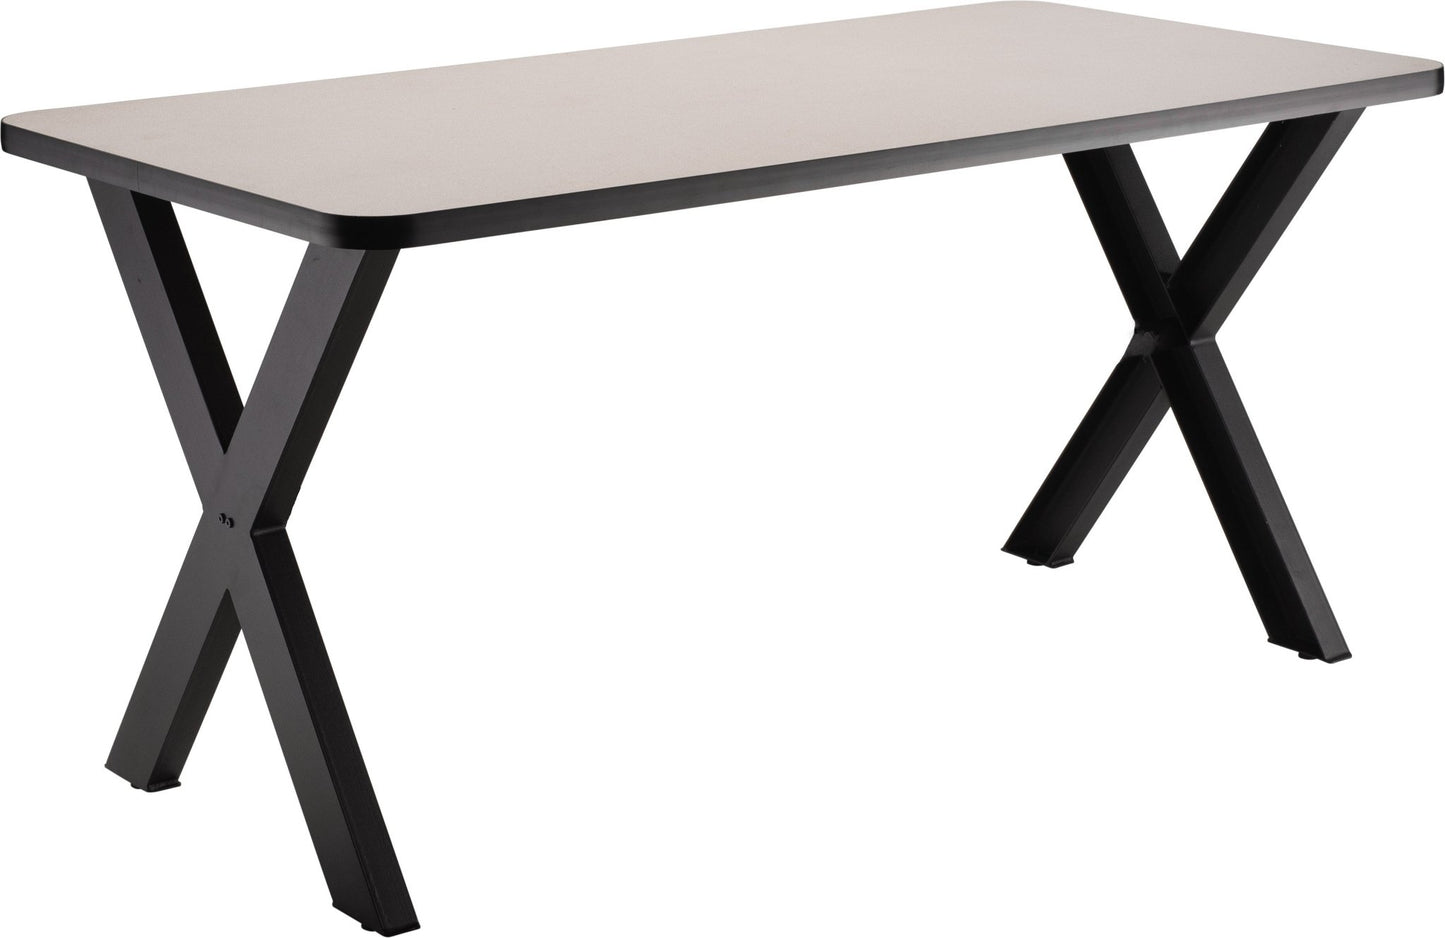 NPS CLT3060D2 - Collaborator Table, 30"x 60" Rectangle, 30" Height w/ Crossbeam, High Pressure Laminate Top (National Public Seating NPS-CLT3060D2) - SchoolOutlet